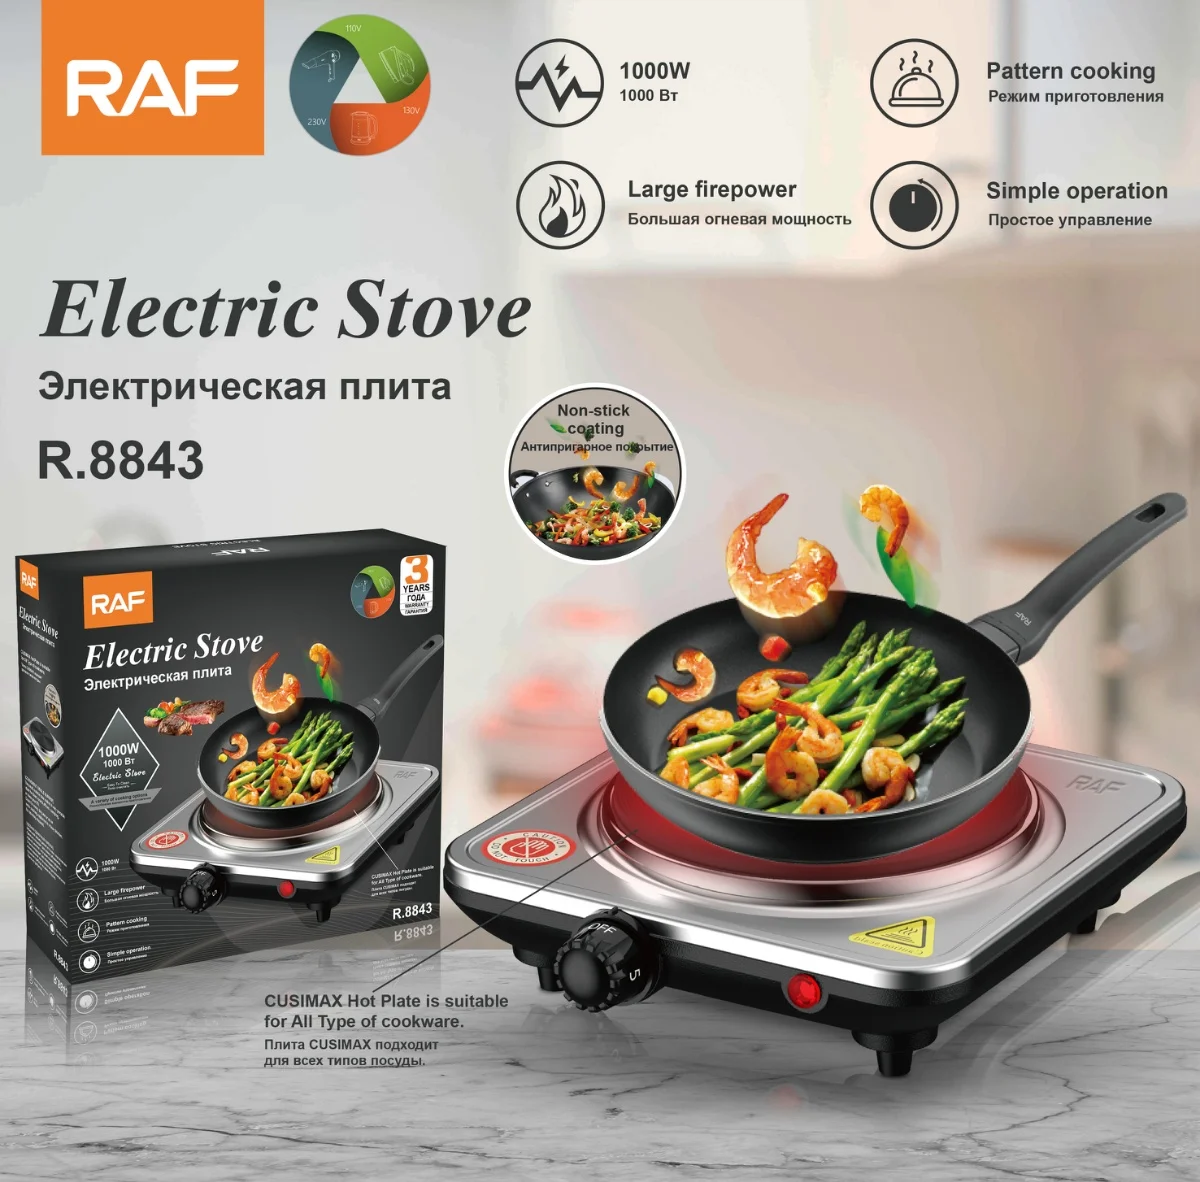 Latest Collection Electric Hot Burner Stove Cooking Countertop Single Flat Burner Electric Hot Plate